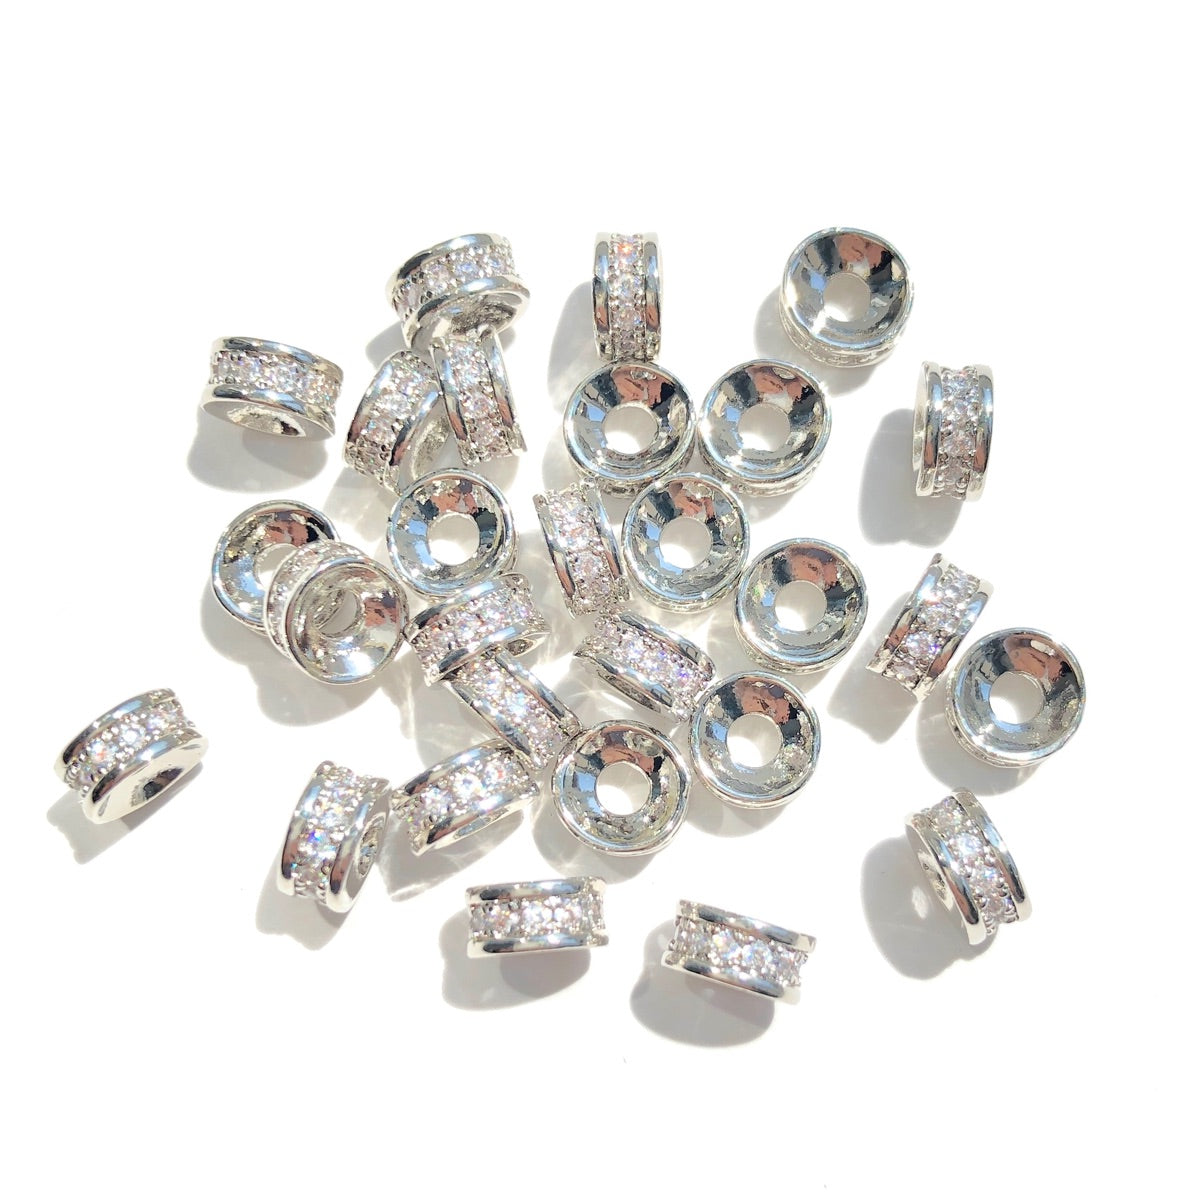 20-50pcs/lot 6*3mm CZ Paved Small Rondelle Wheel Spacers Silver CZ Paved Spacers New Spacers Arrivals Rondelle Beads Wholesale Charms Beads Beyond